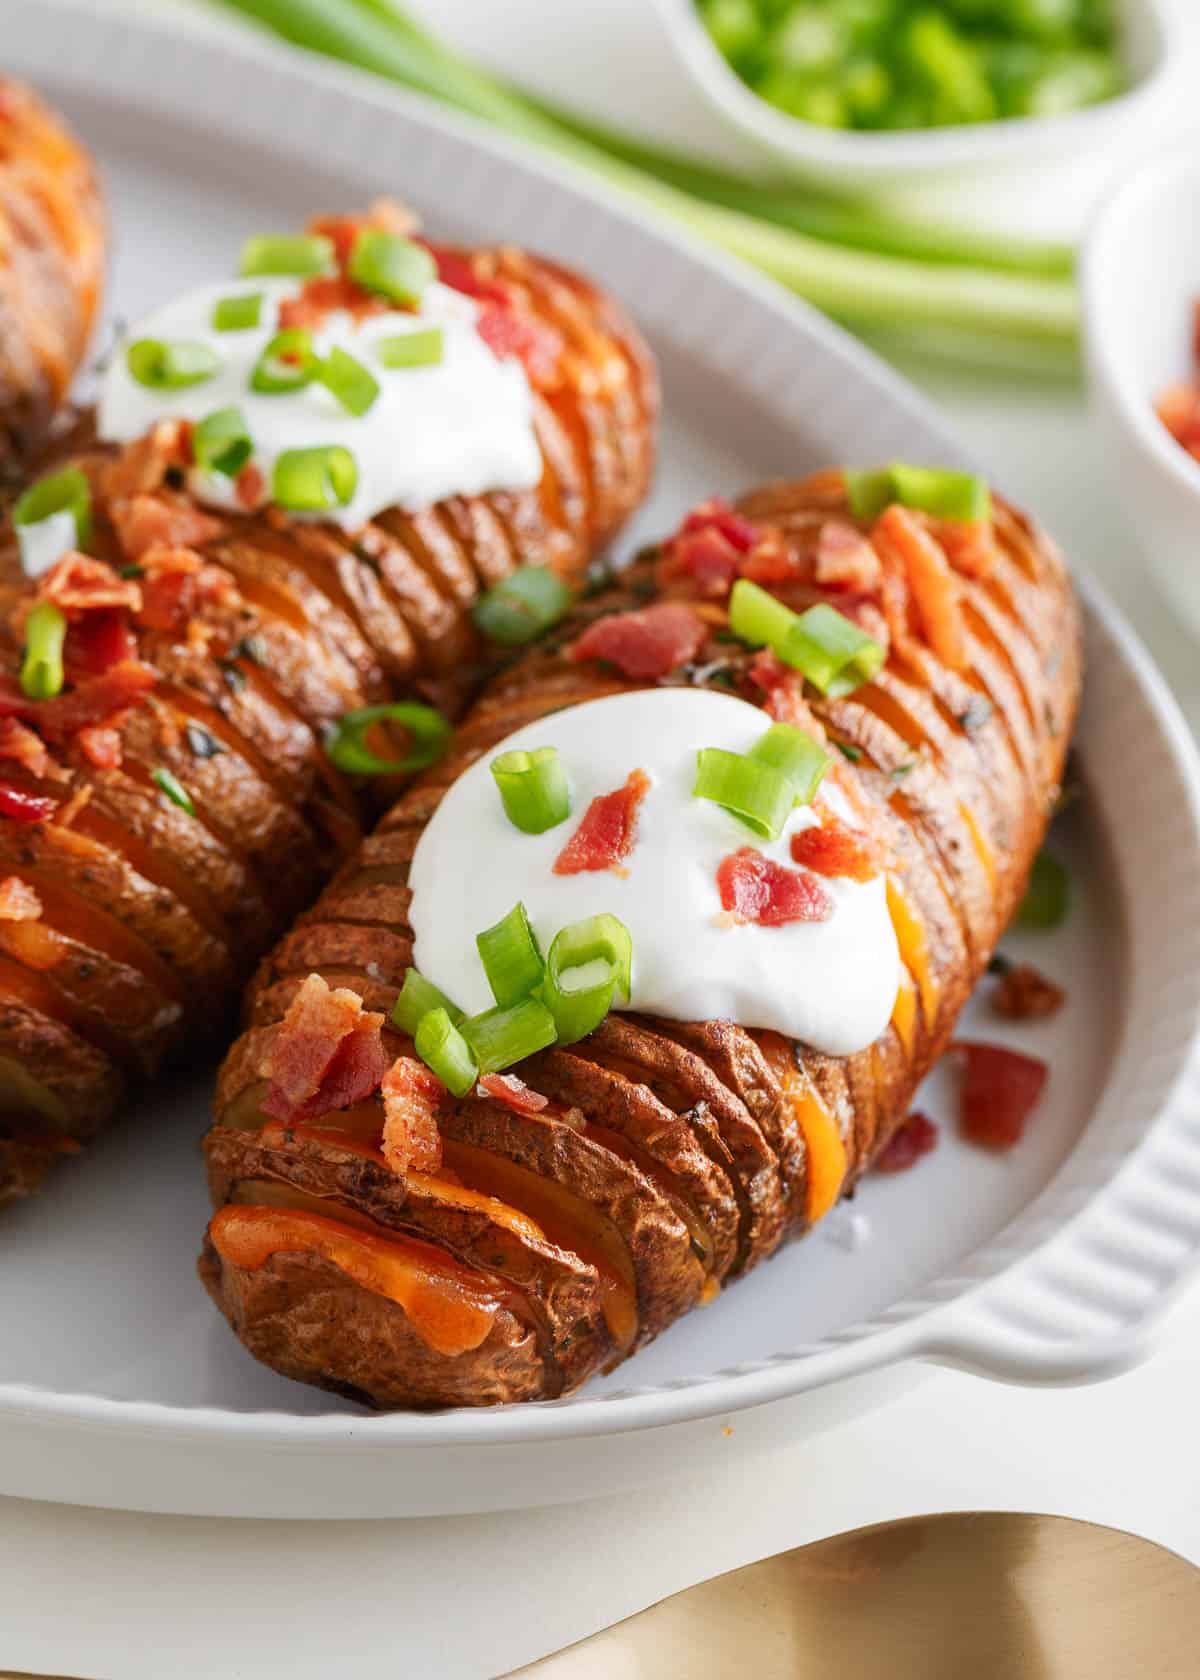 Hasselback potatoes with sour cream on top.